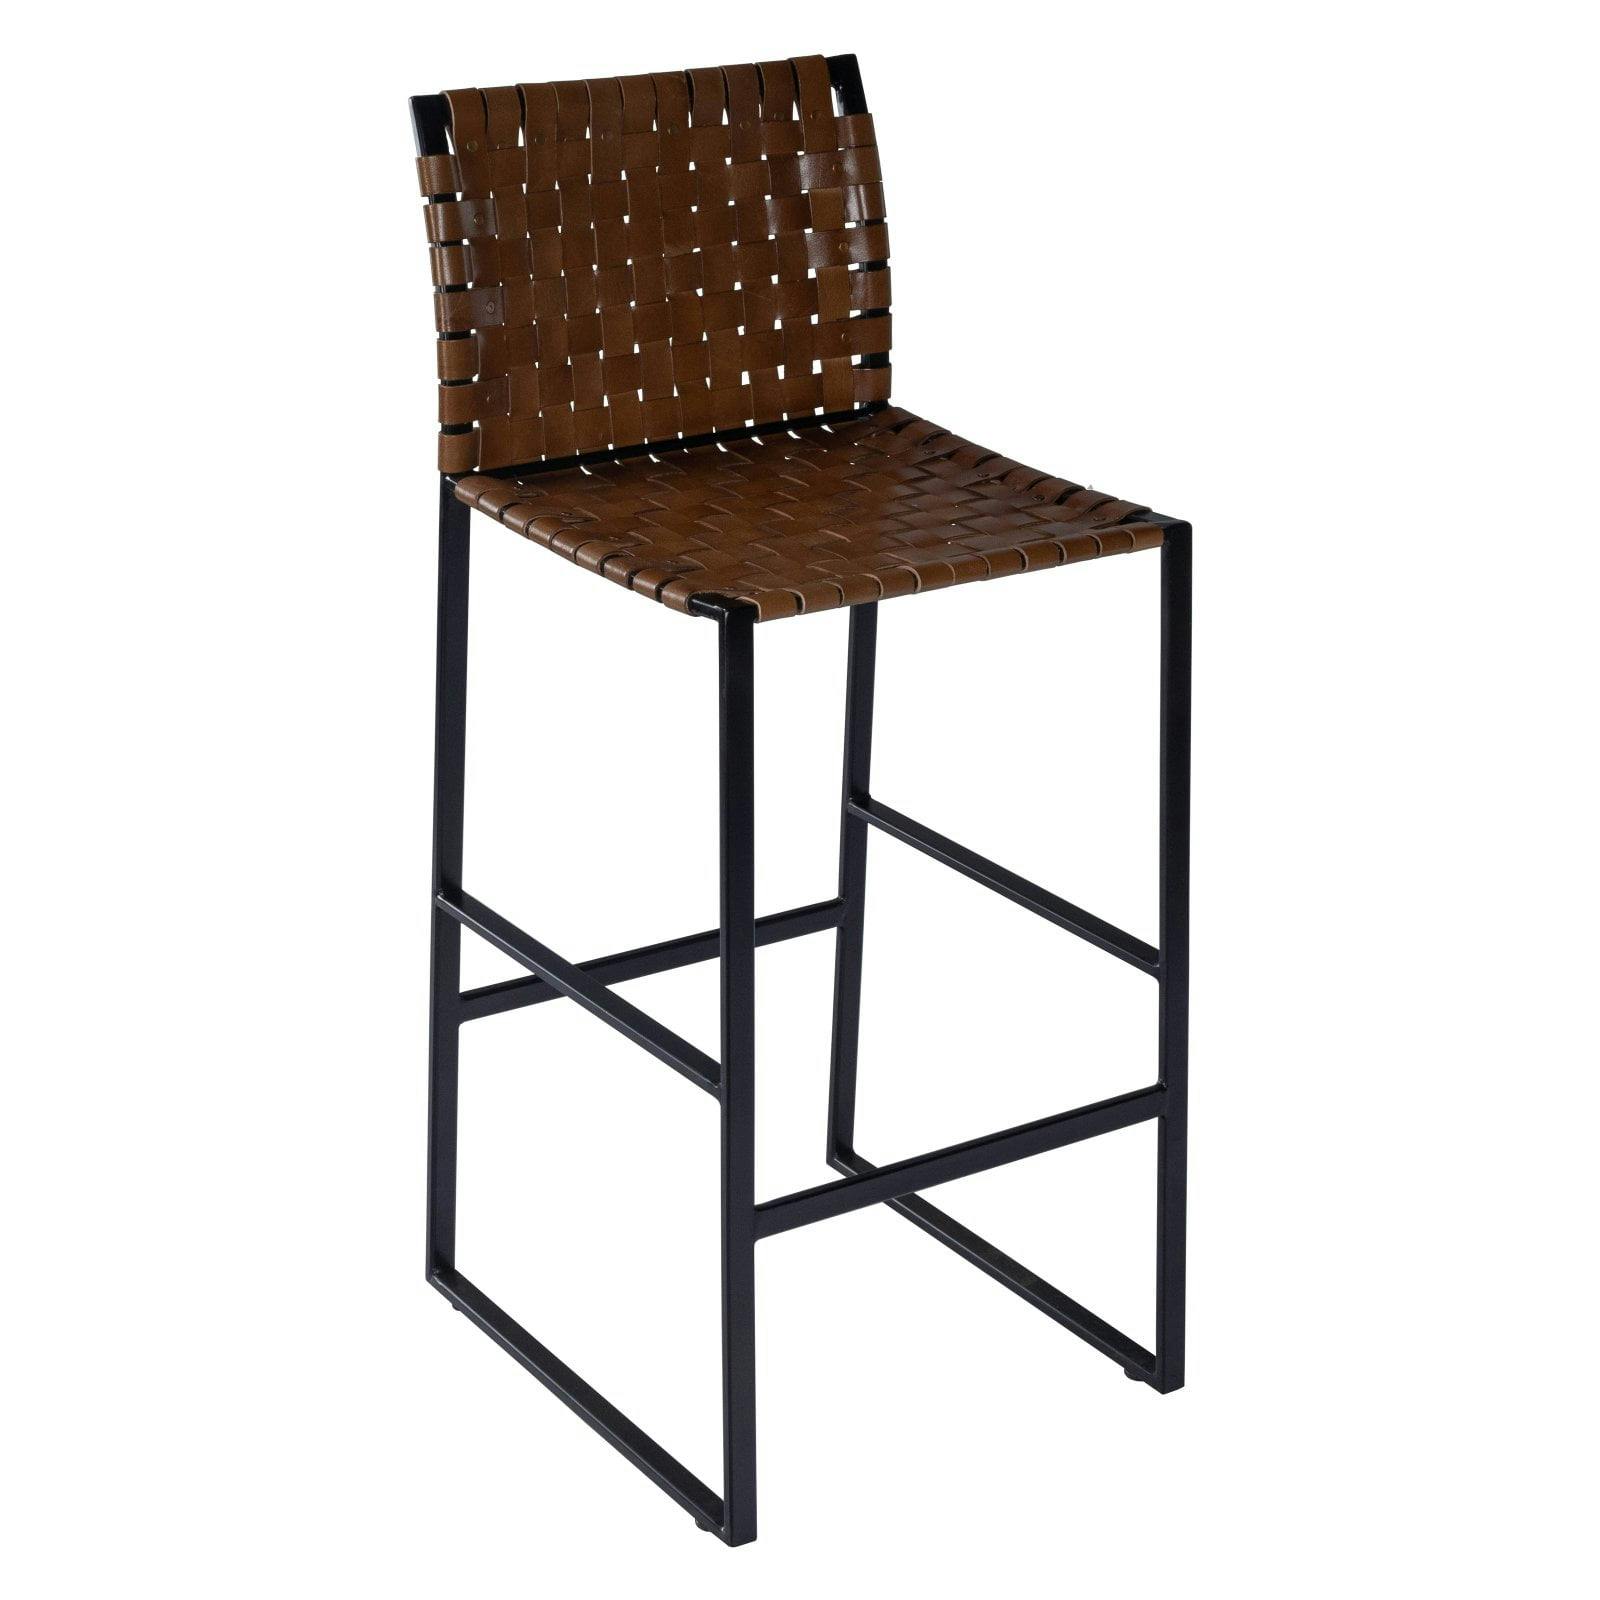 Urban Brown Woven Leather Bar Stool with Black Iron Base